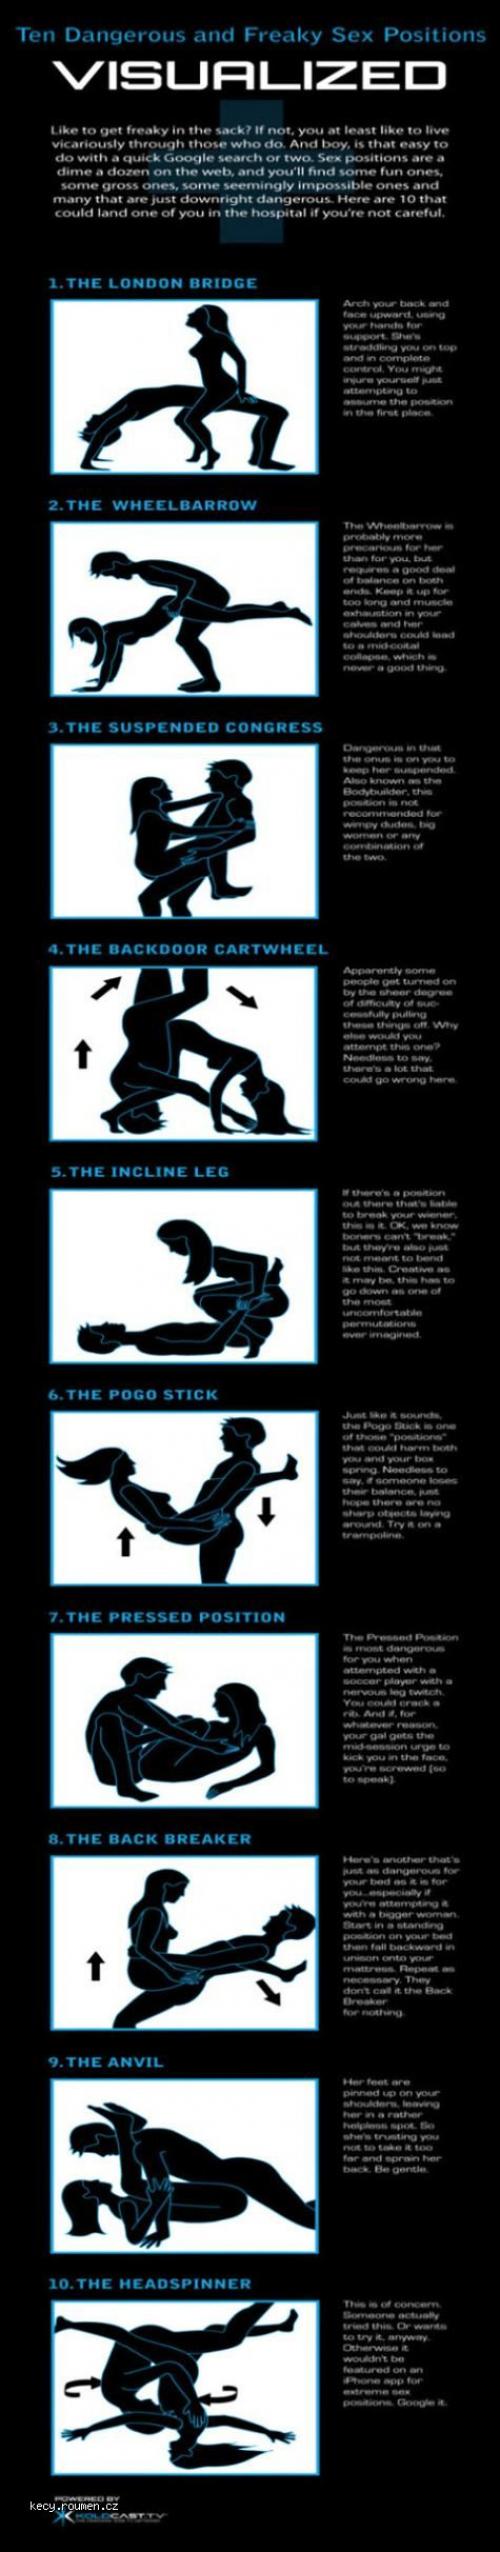 Freaky sex positions